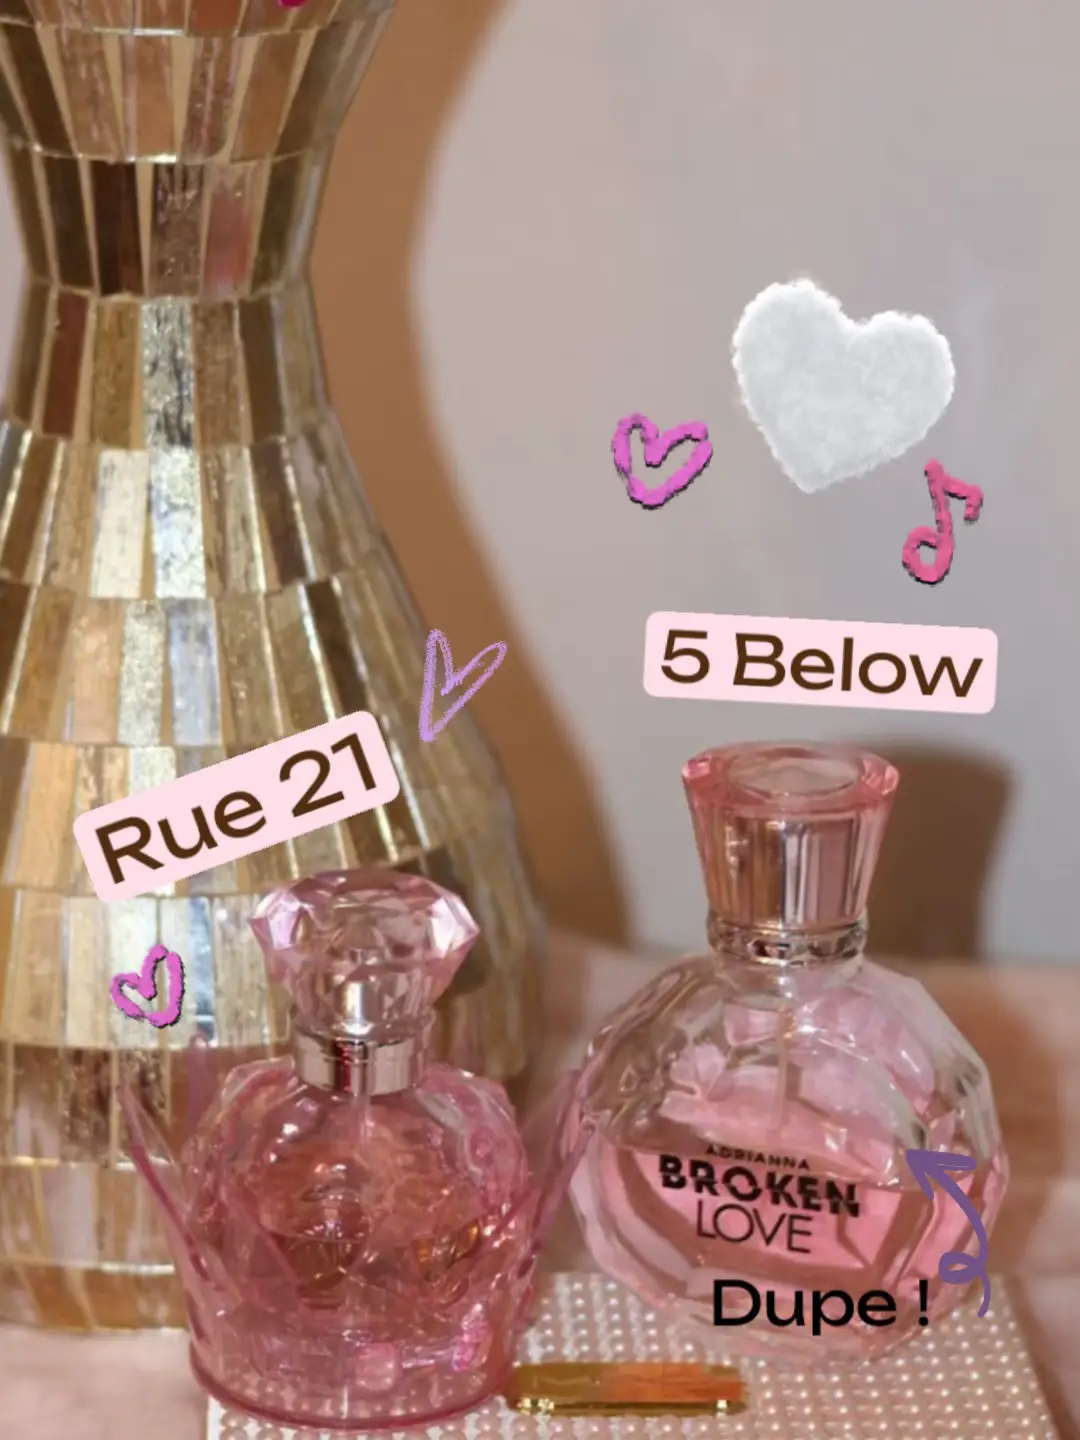 Finally ran out of Etc! by Rue 21--any perfumes similar? It's a fruity  smell with slight floral notes. New to this! :) : r/Perfumes